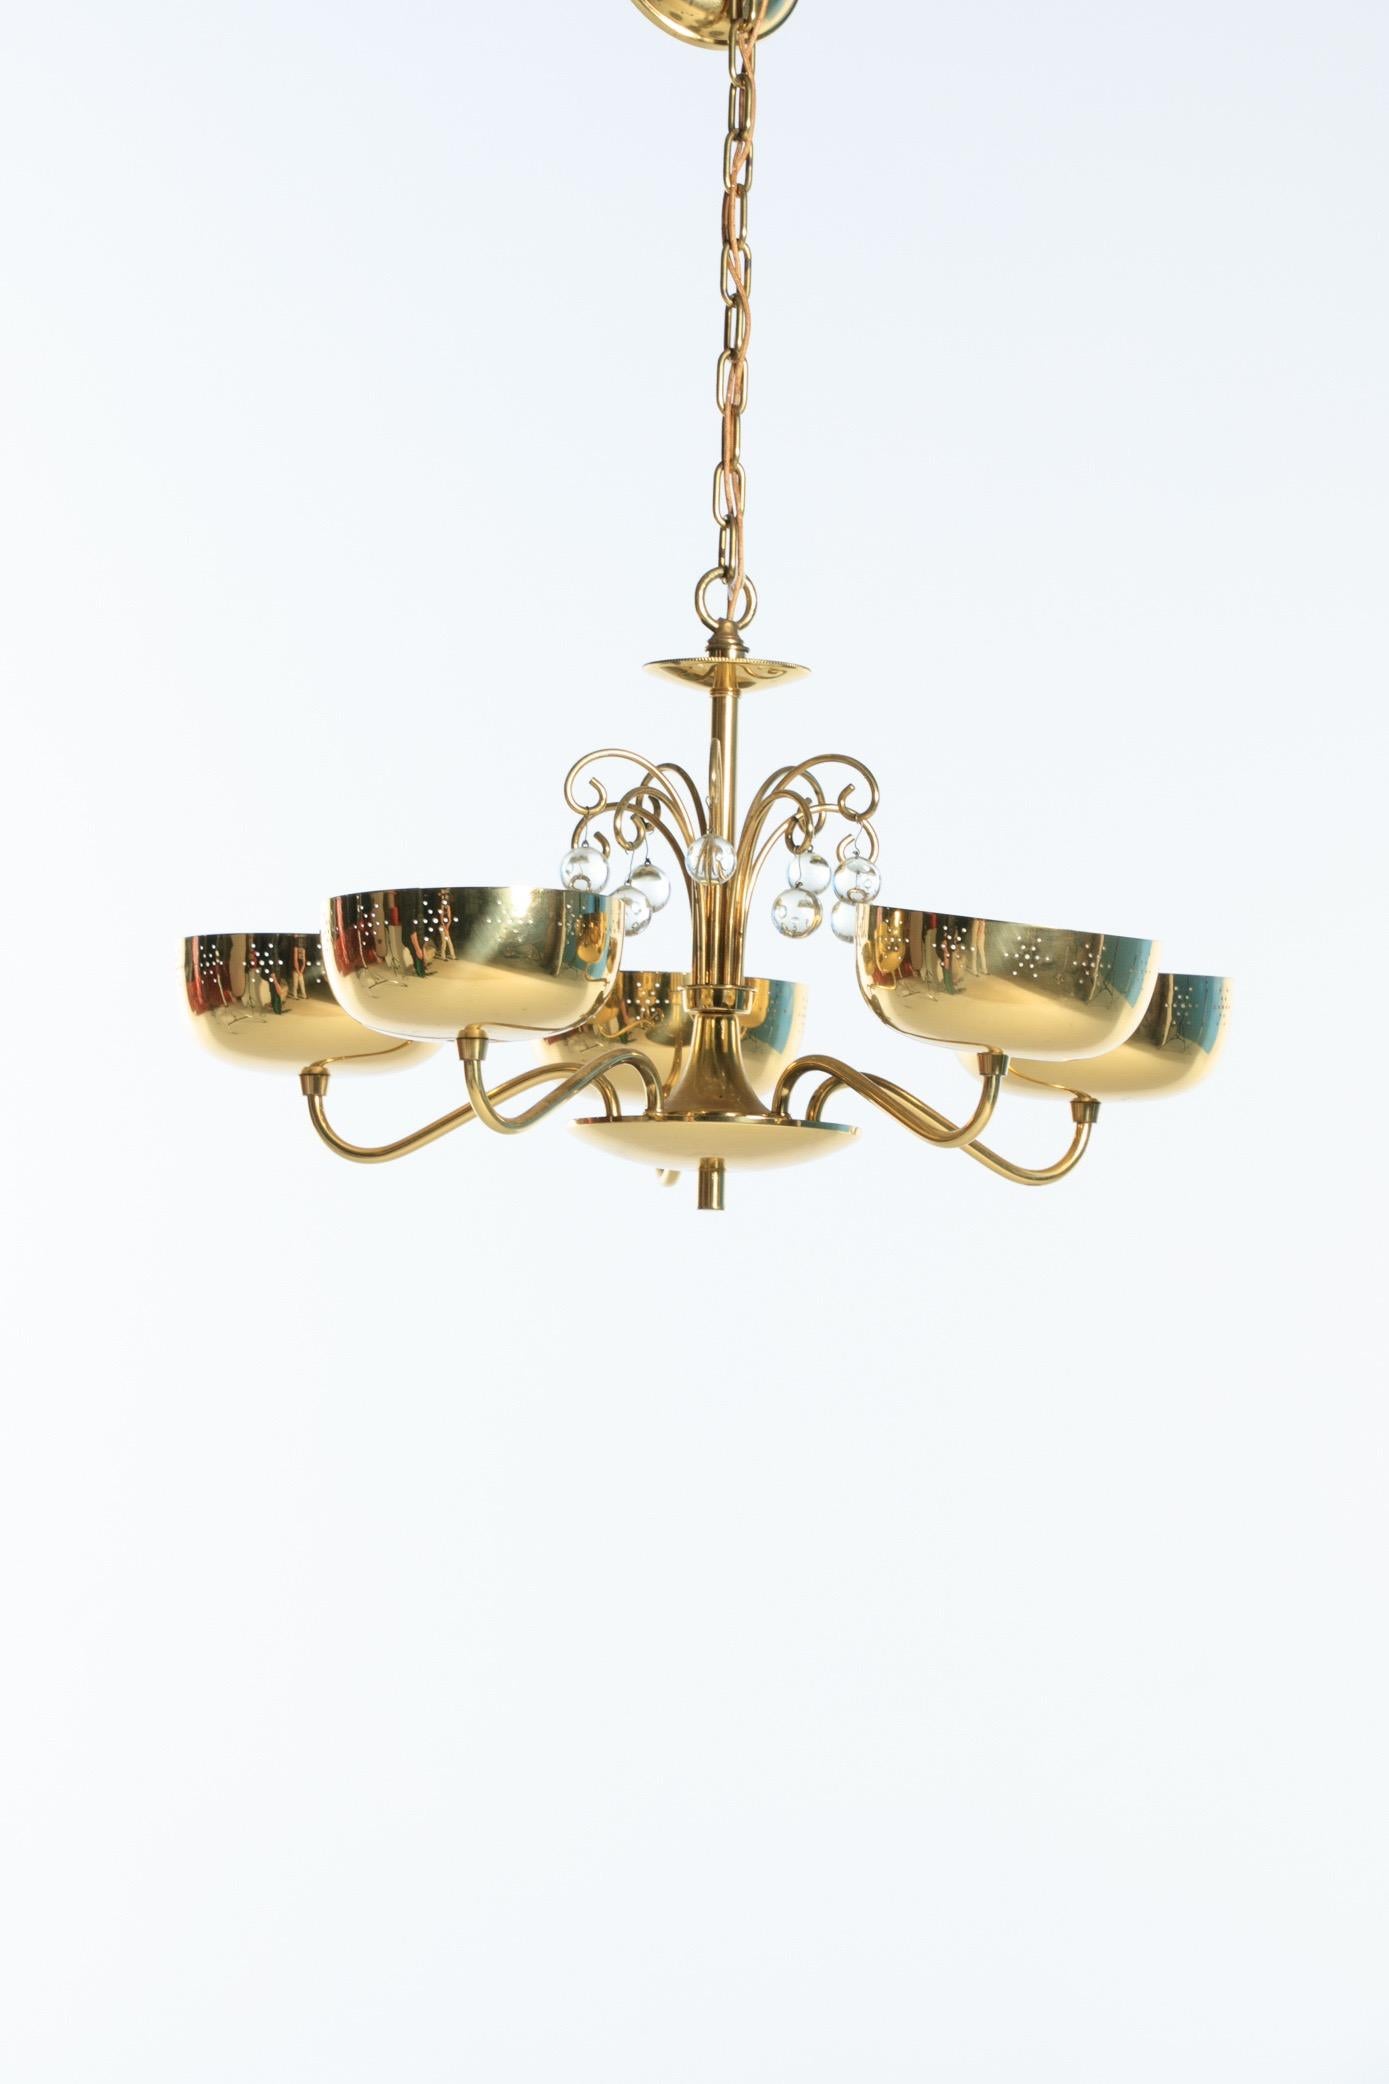 A brass and crystal chandelier attributed to Lightolier, in the style of Paavo Tynell. Possibly designed by Gerald Thurston. Perforated brass upwards lights with crystal balls hanging from top. An elegant design with some whimsy. Want to see more